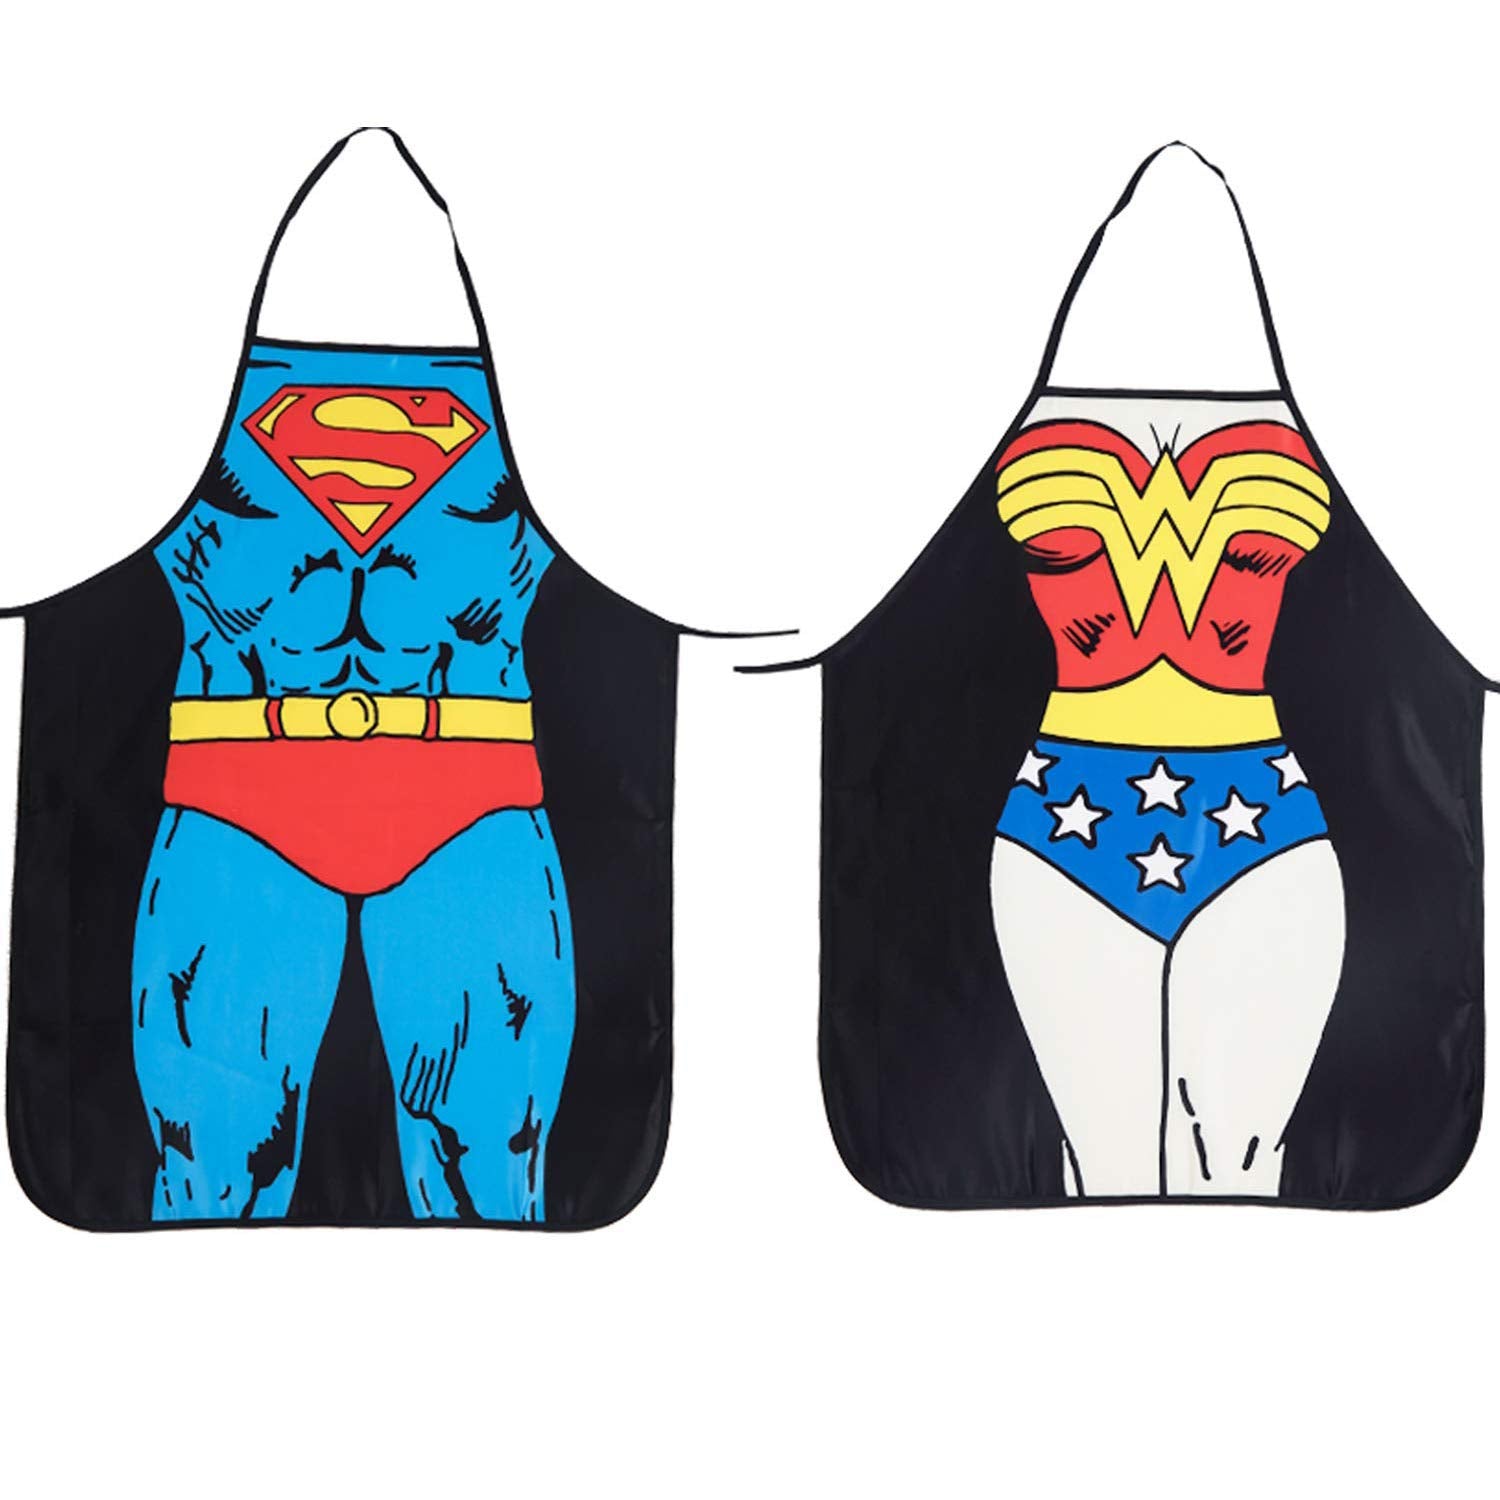 Cycorld Funny Novelty Apron Christmas Sexy Kitchen Gift Xmas Cooking BBQ Party Apron for Men and Women Gift (2pcs Superman + Wonder Woman Aprons)